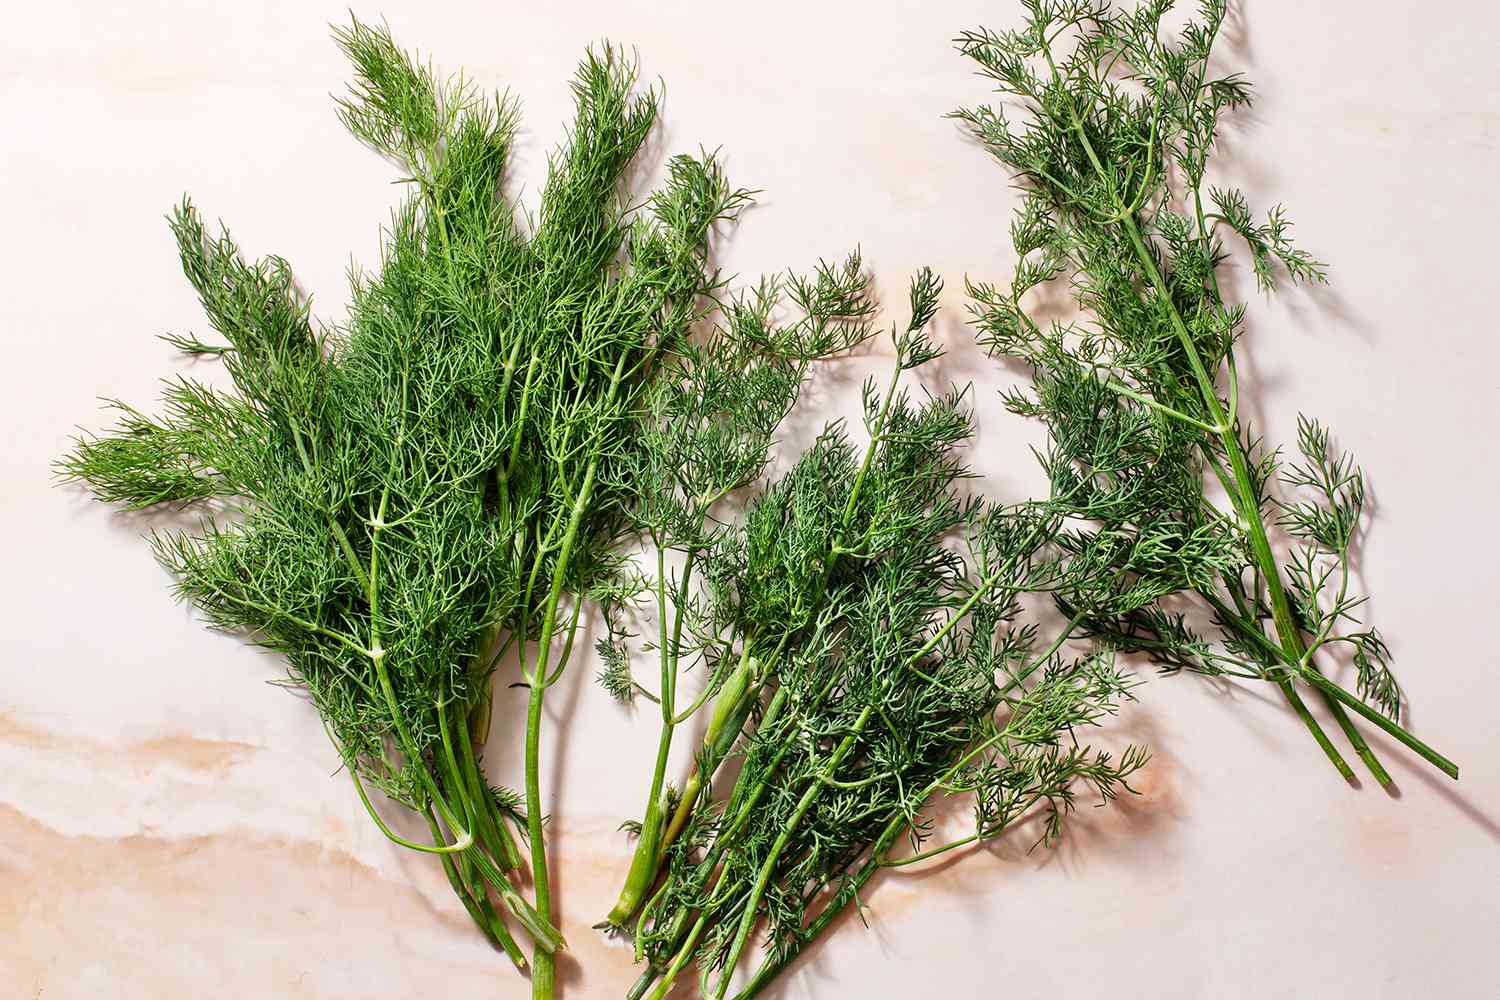 How To Trim Dill Plant